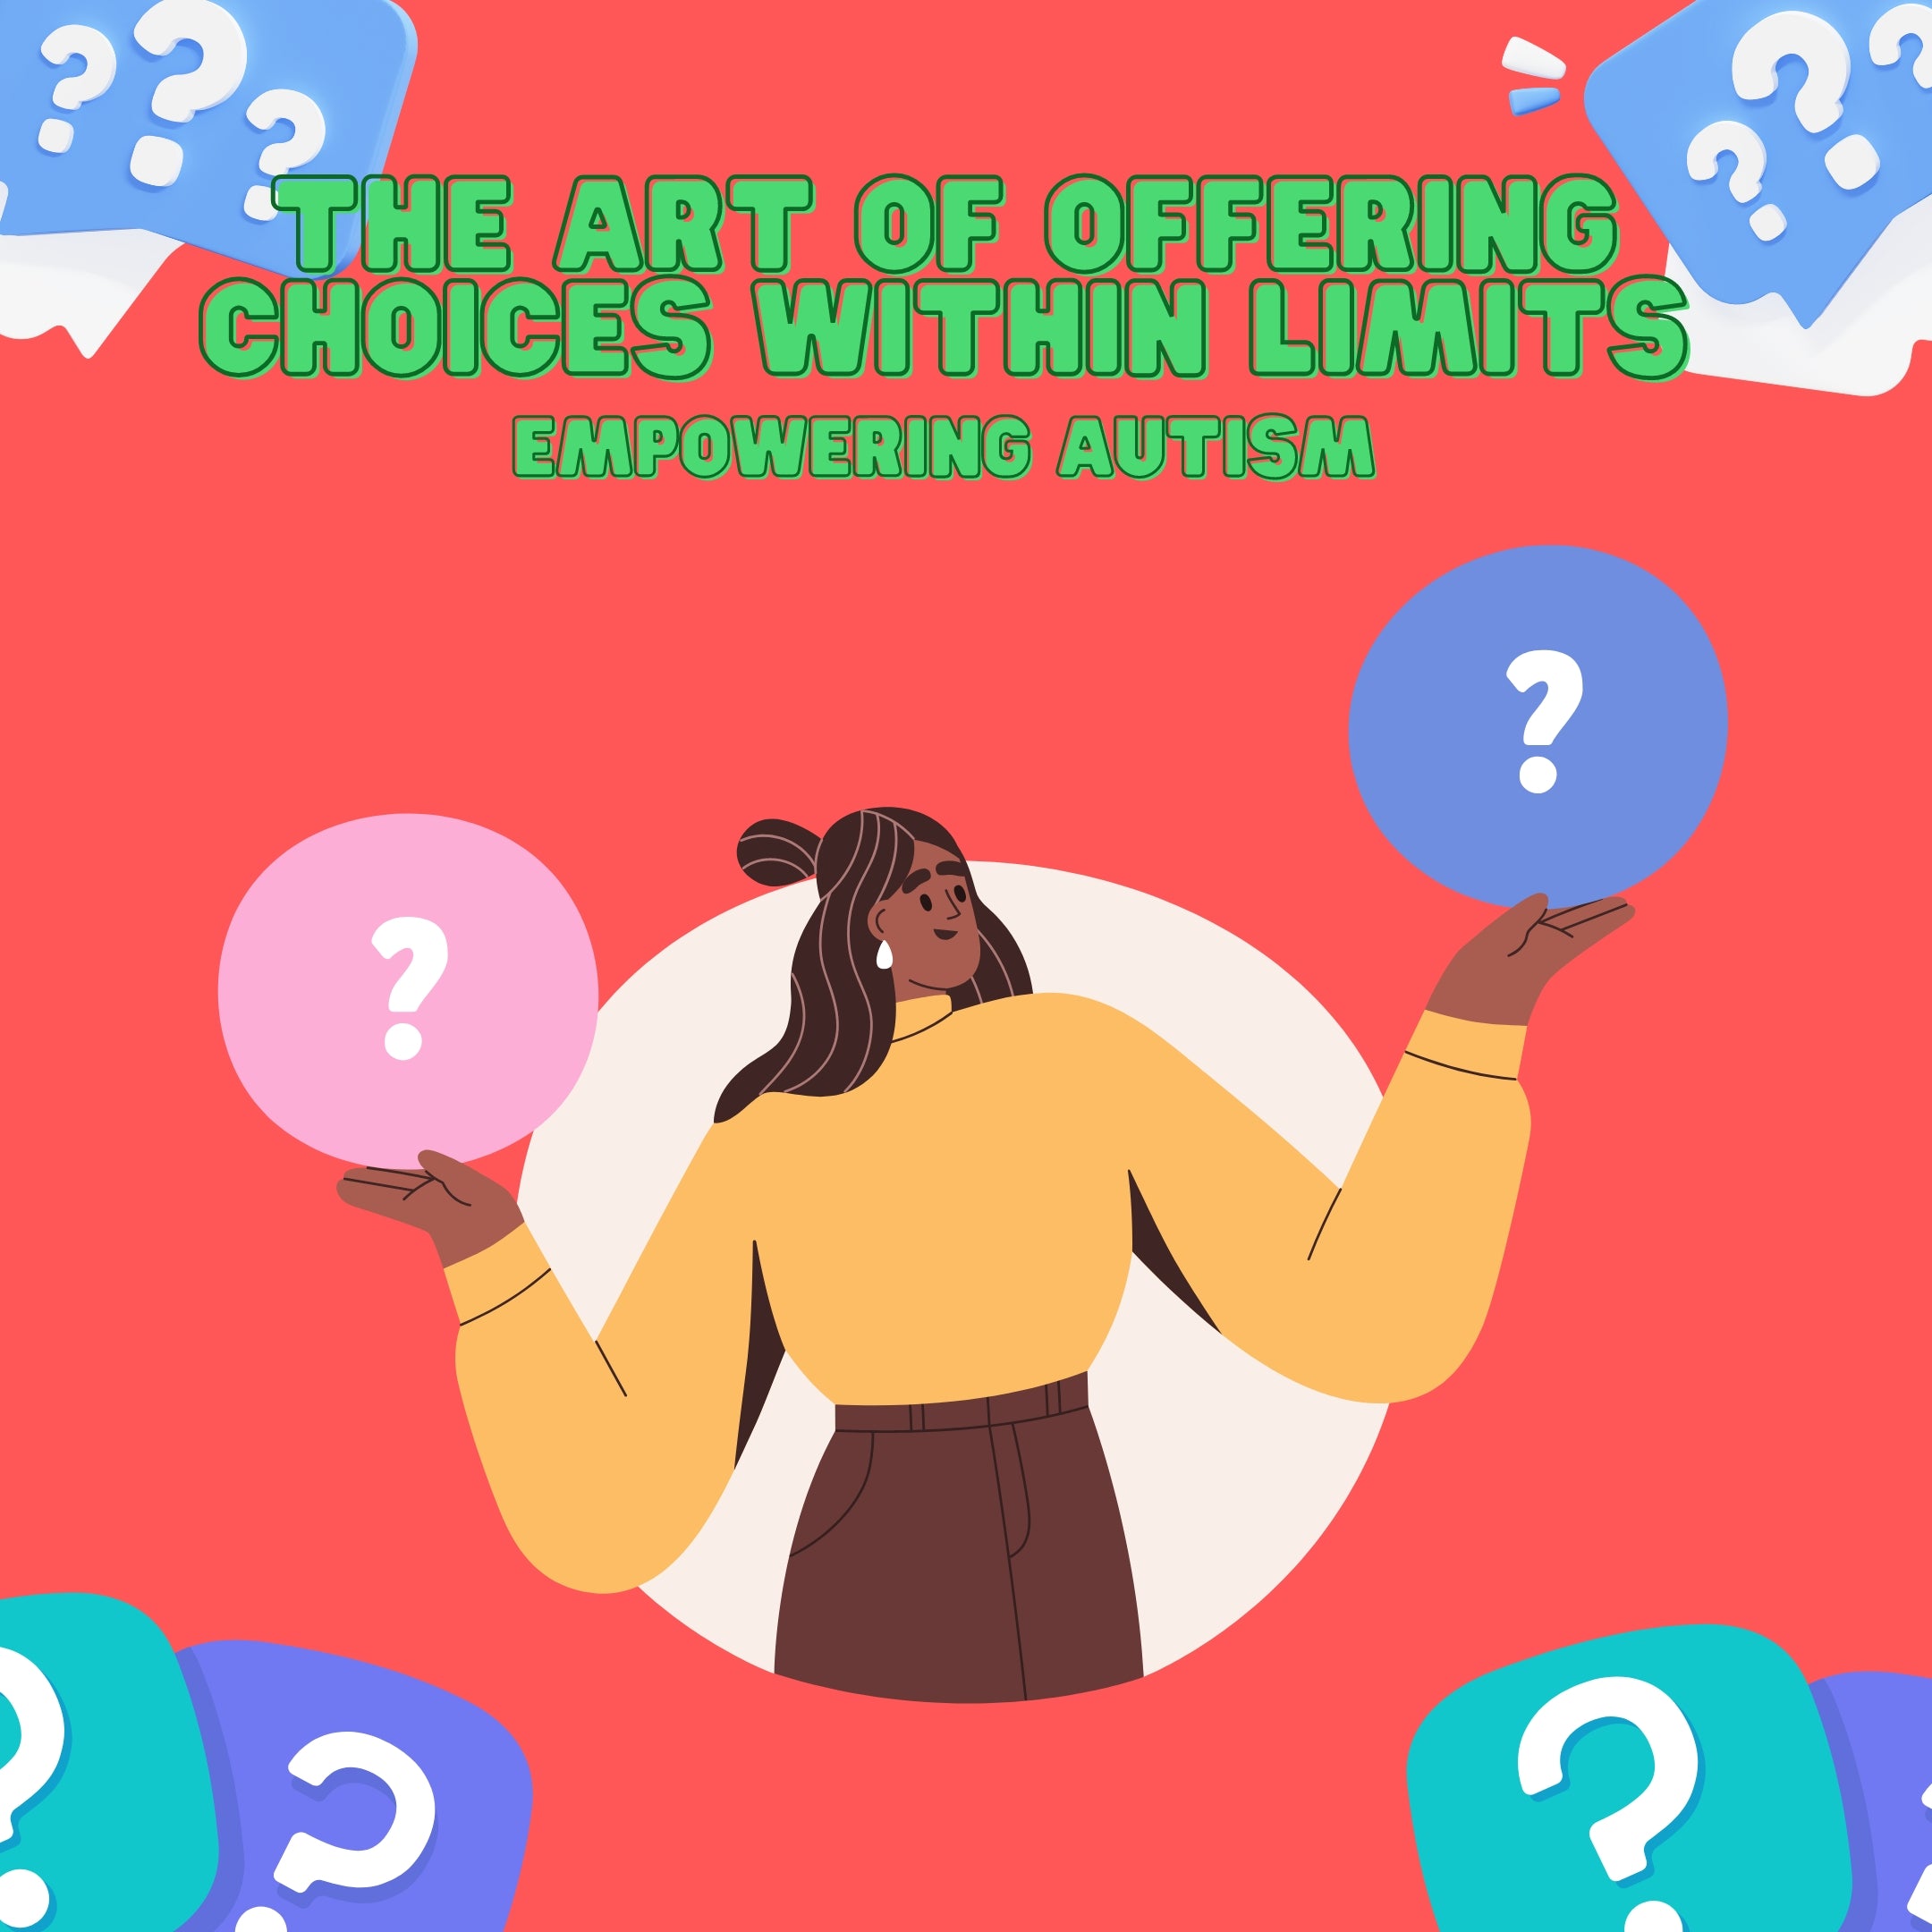 Empowering Autism: The Art of Offering Choices Within Limits